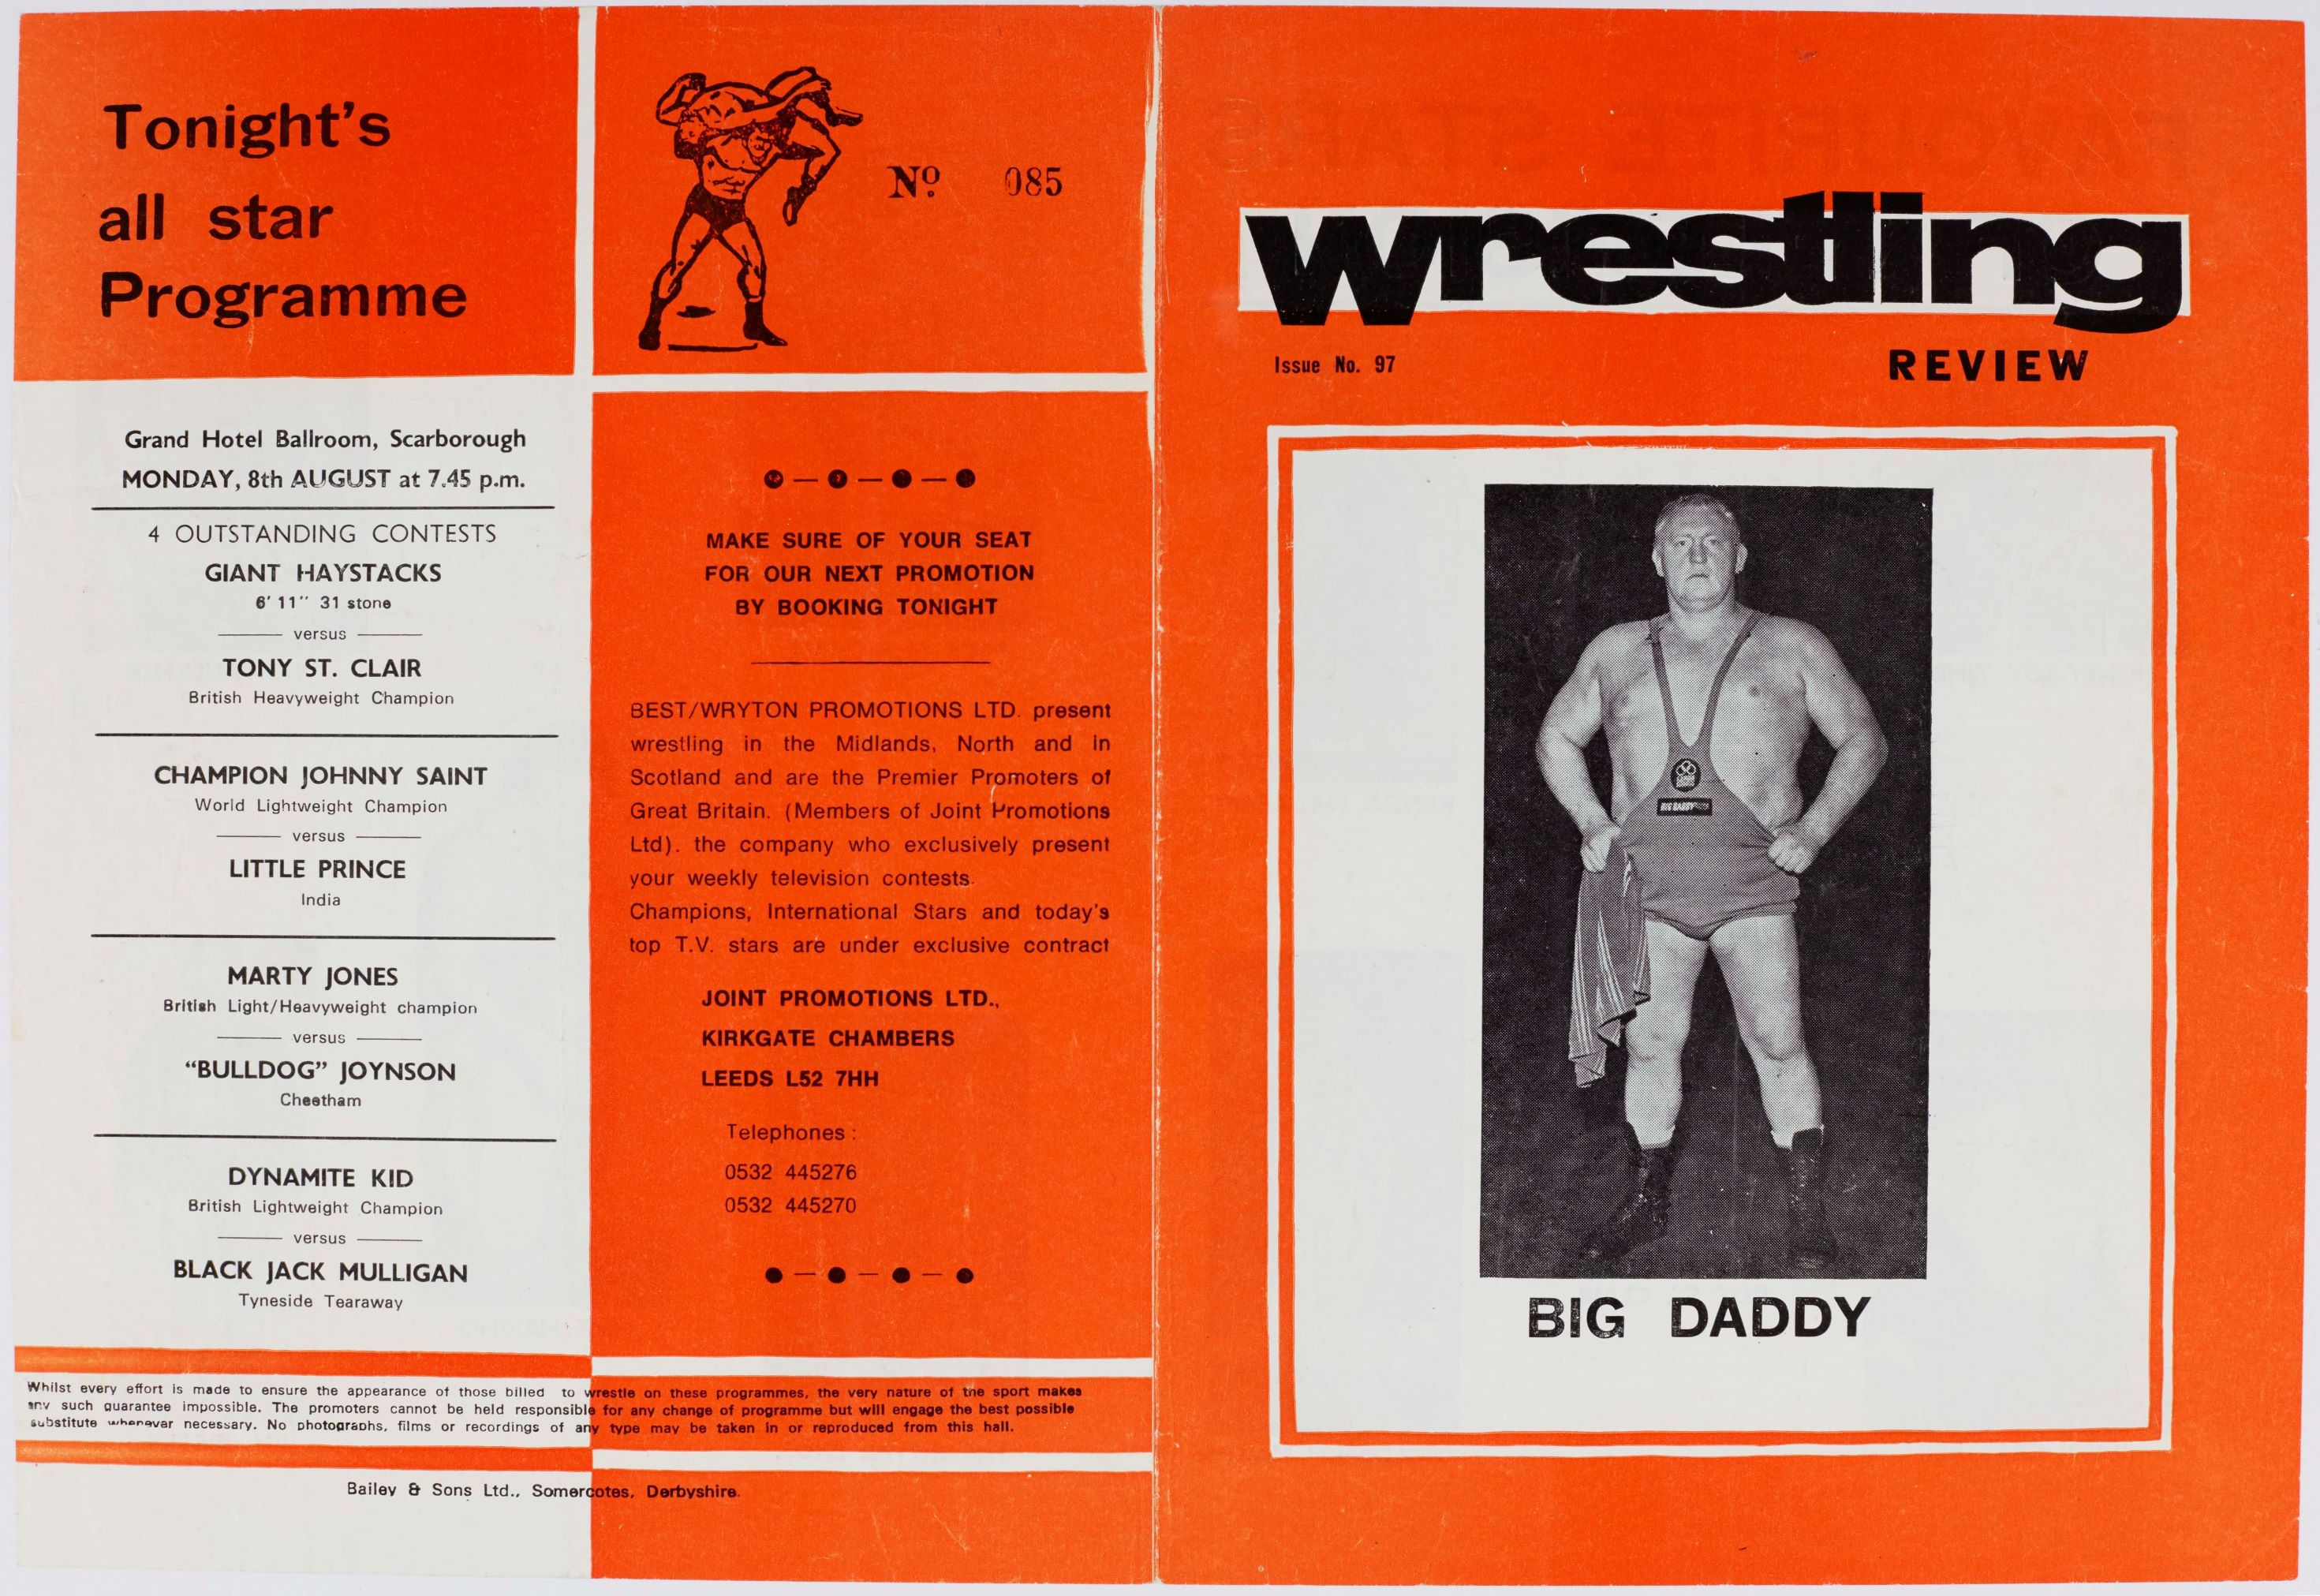 Wrestler Big Daddy on the front cover of a Wrestling Review programme, Grand Hotel Ballroom, Scarborough (no date). 